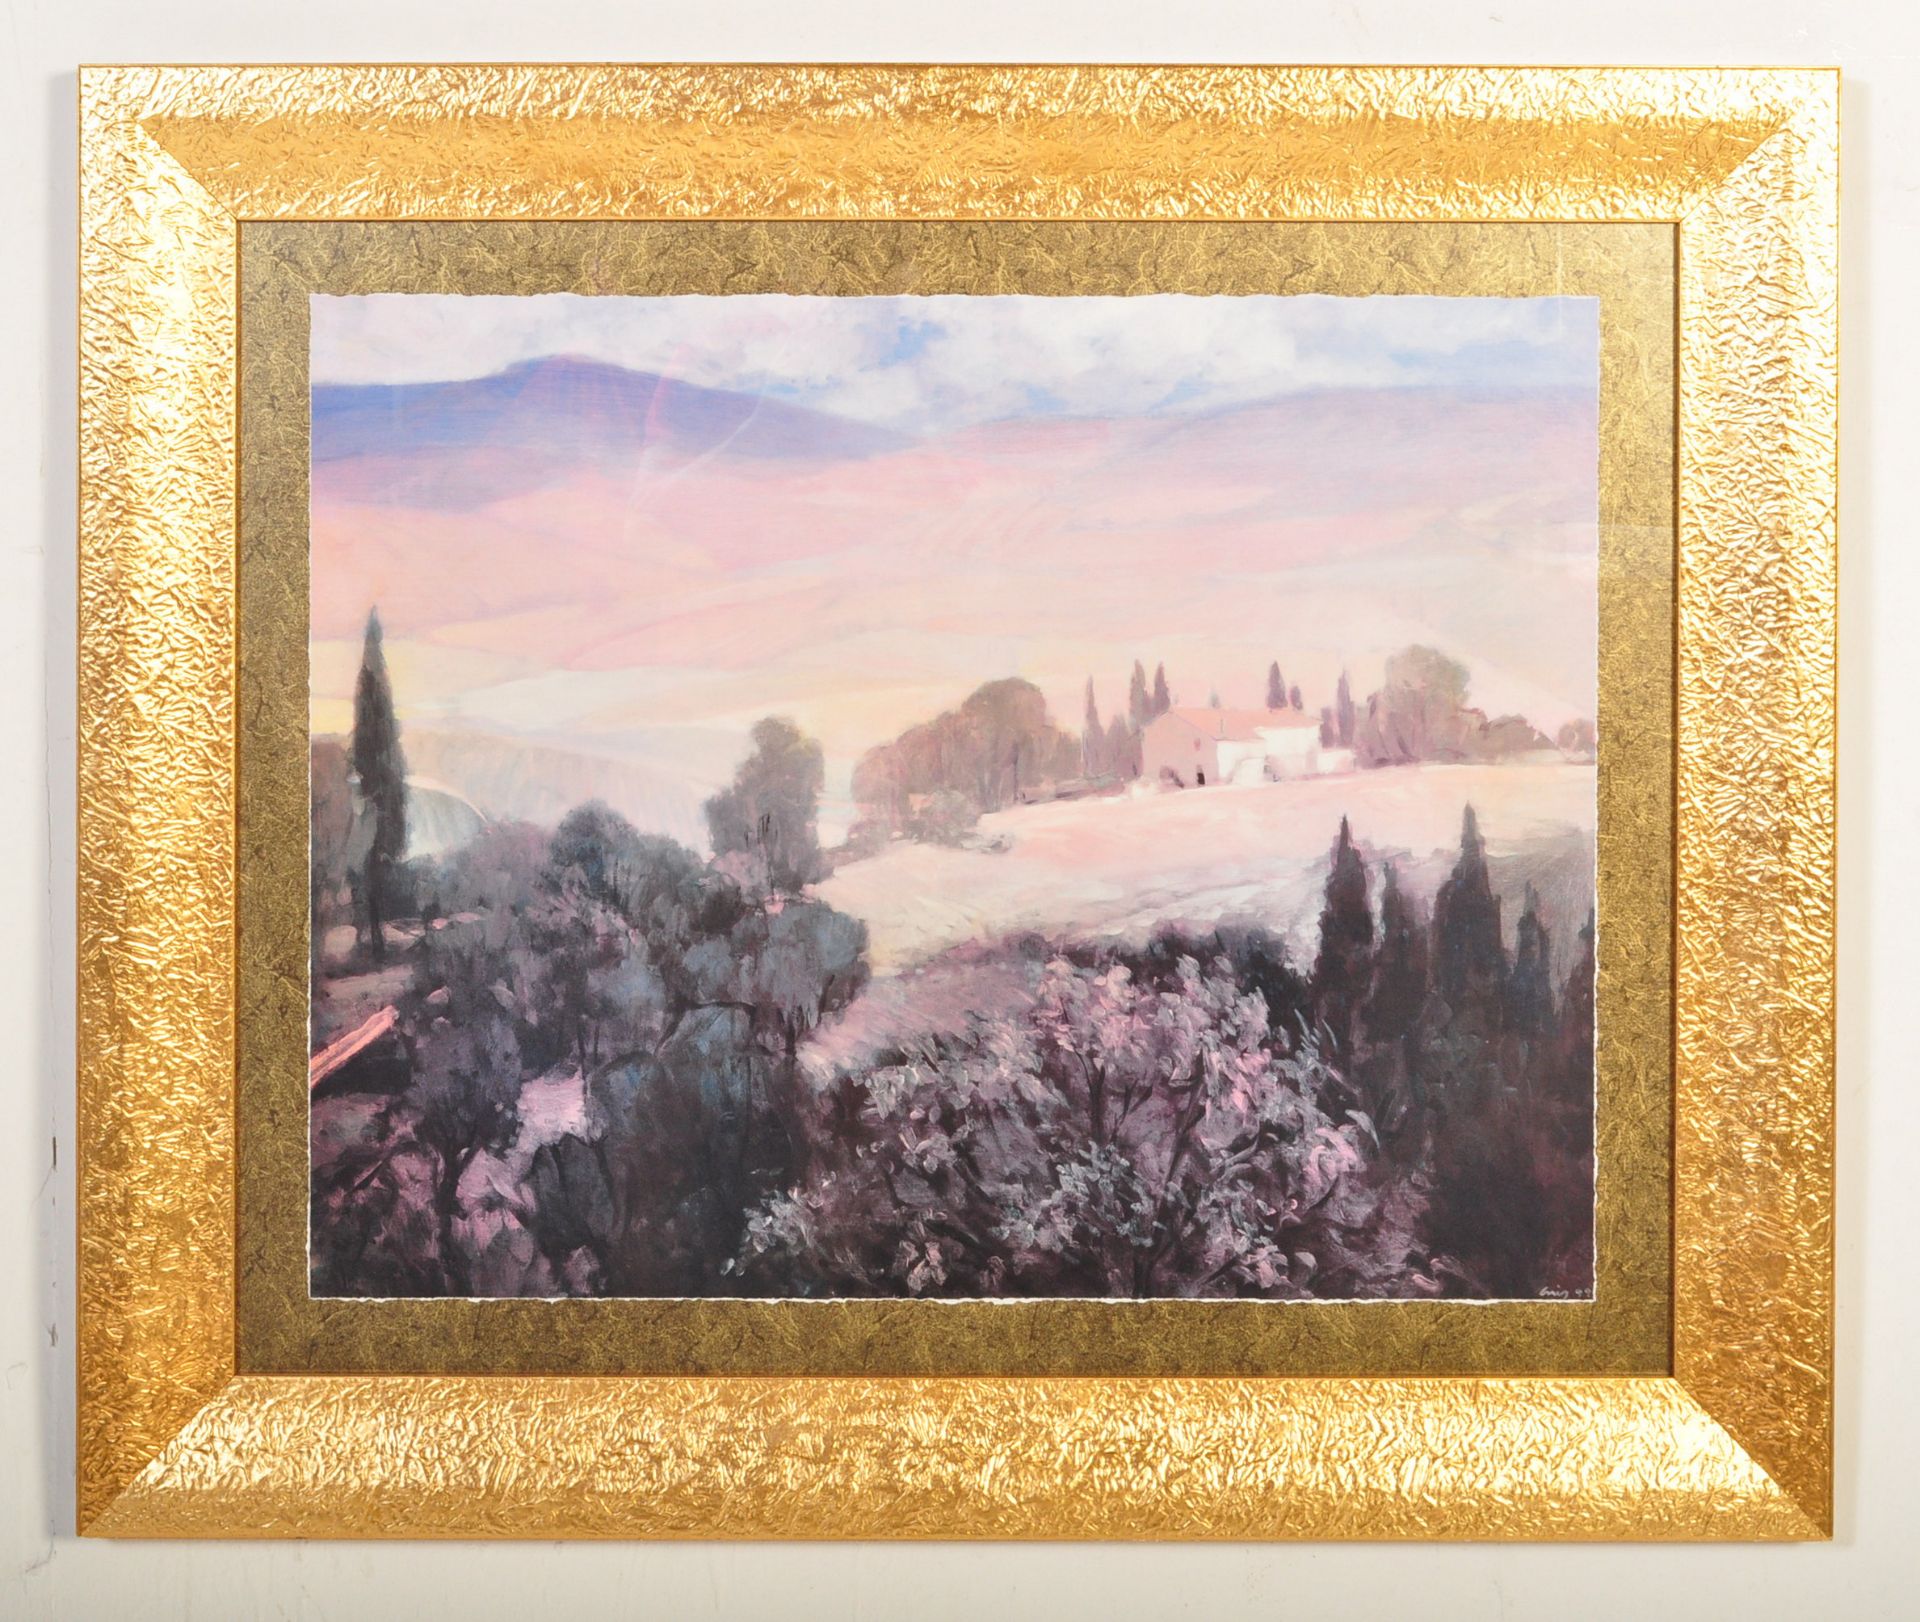 P. CRAIG - WATERCOLOUR PAINTING SET WITHIN A GILT FRAME - Image 2 of 5